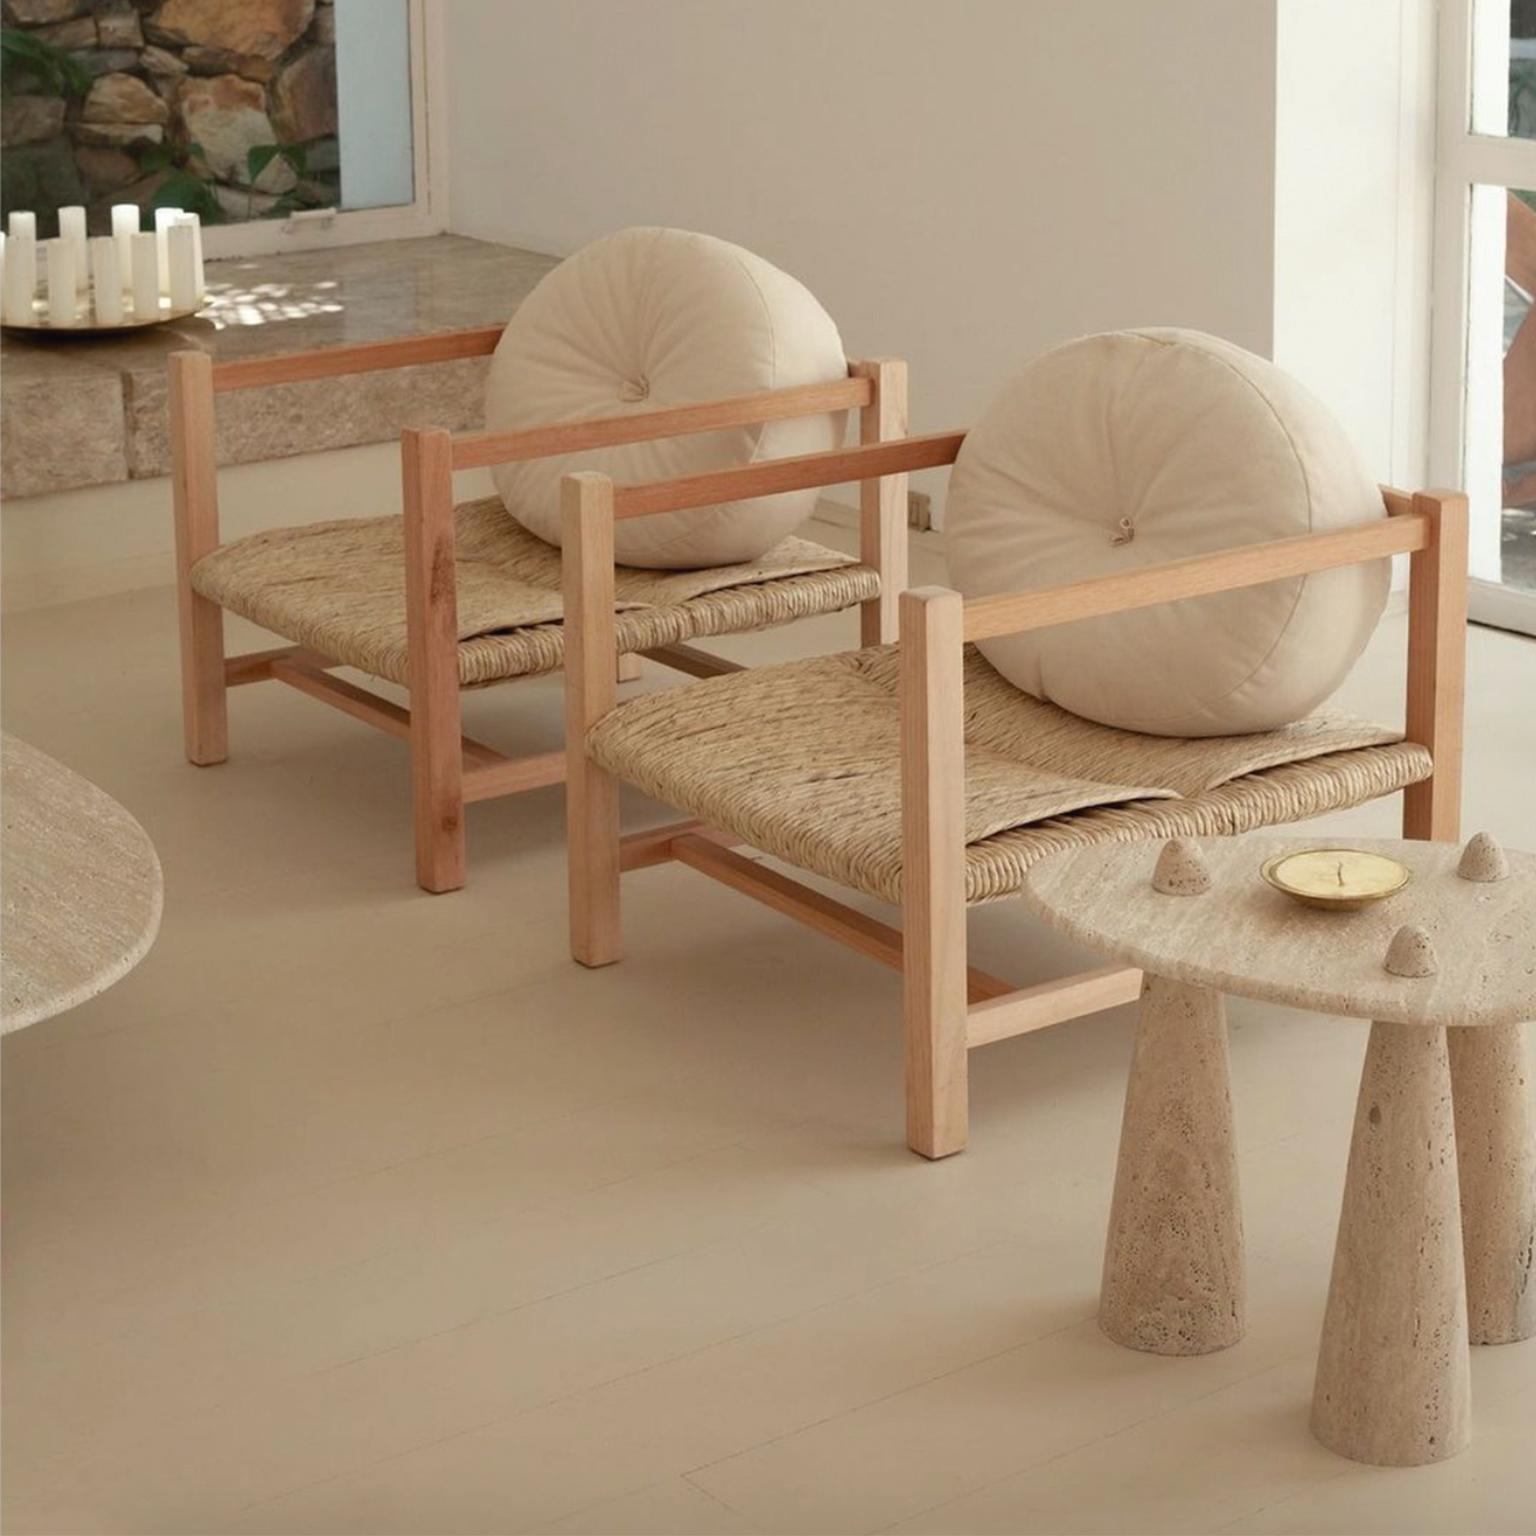 This contemporary armchair in wood and braided straw with raw cotton cushion was meticulously handmade by master artisans one piece at a time. It is therefore quite difficult, if not impossible to make identical items. The projects are based on a